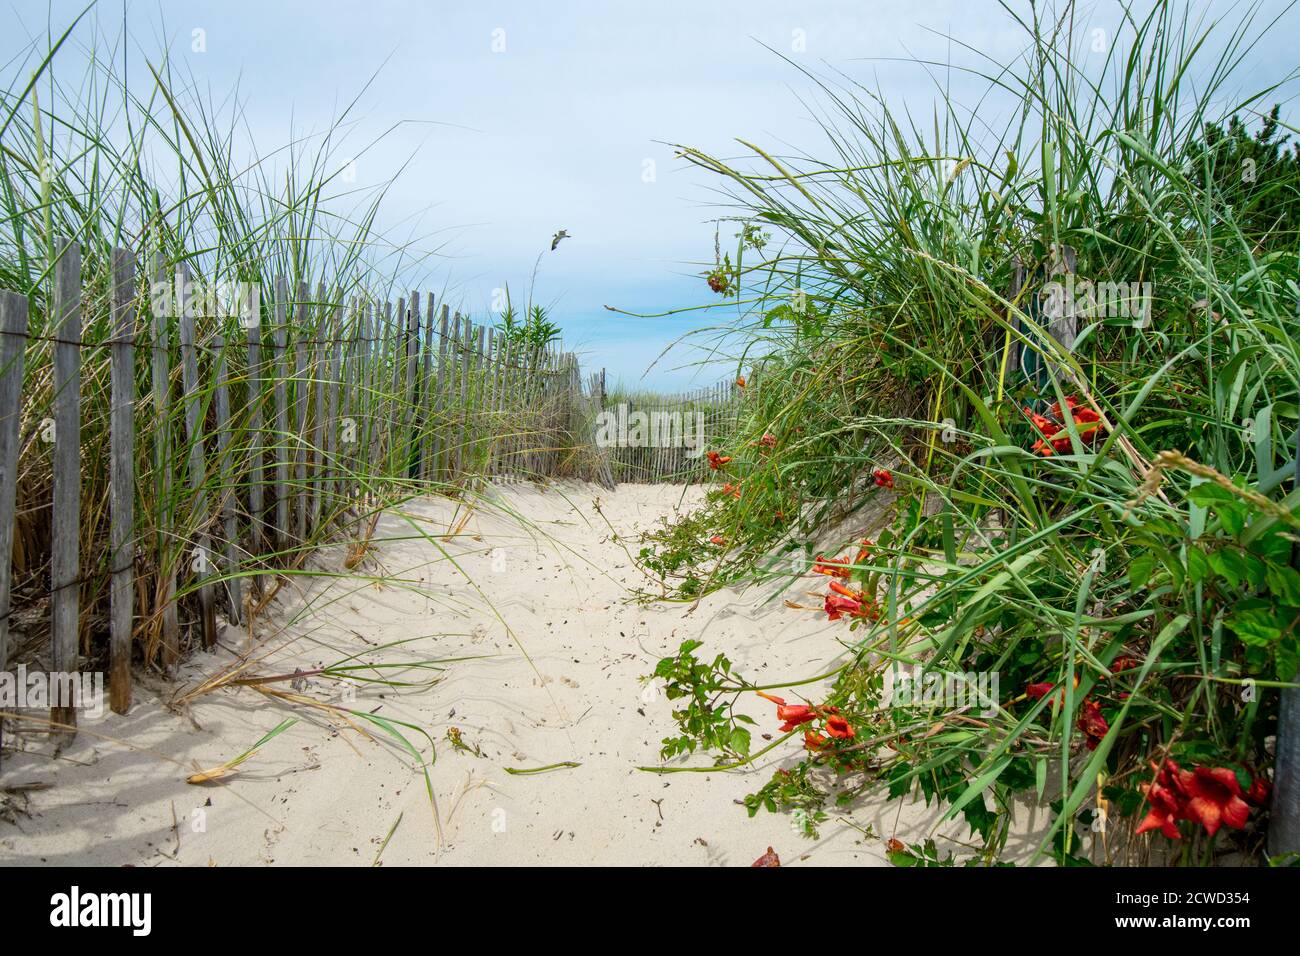 A Sandy Path At the Beach With an Old Wooden Fence and Overgrown Plants on Each Side Stock Photo